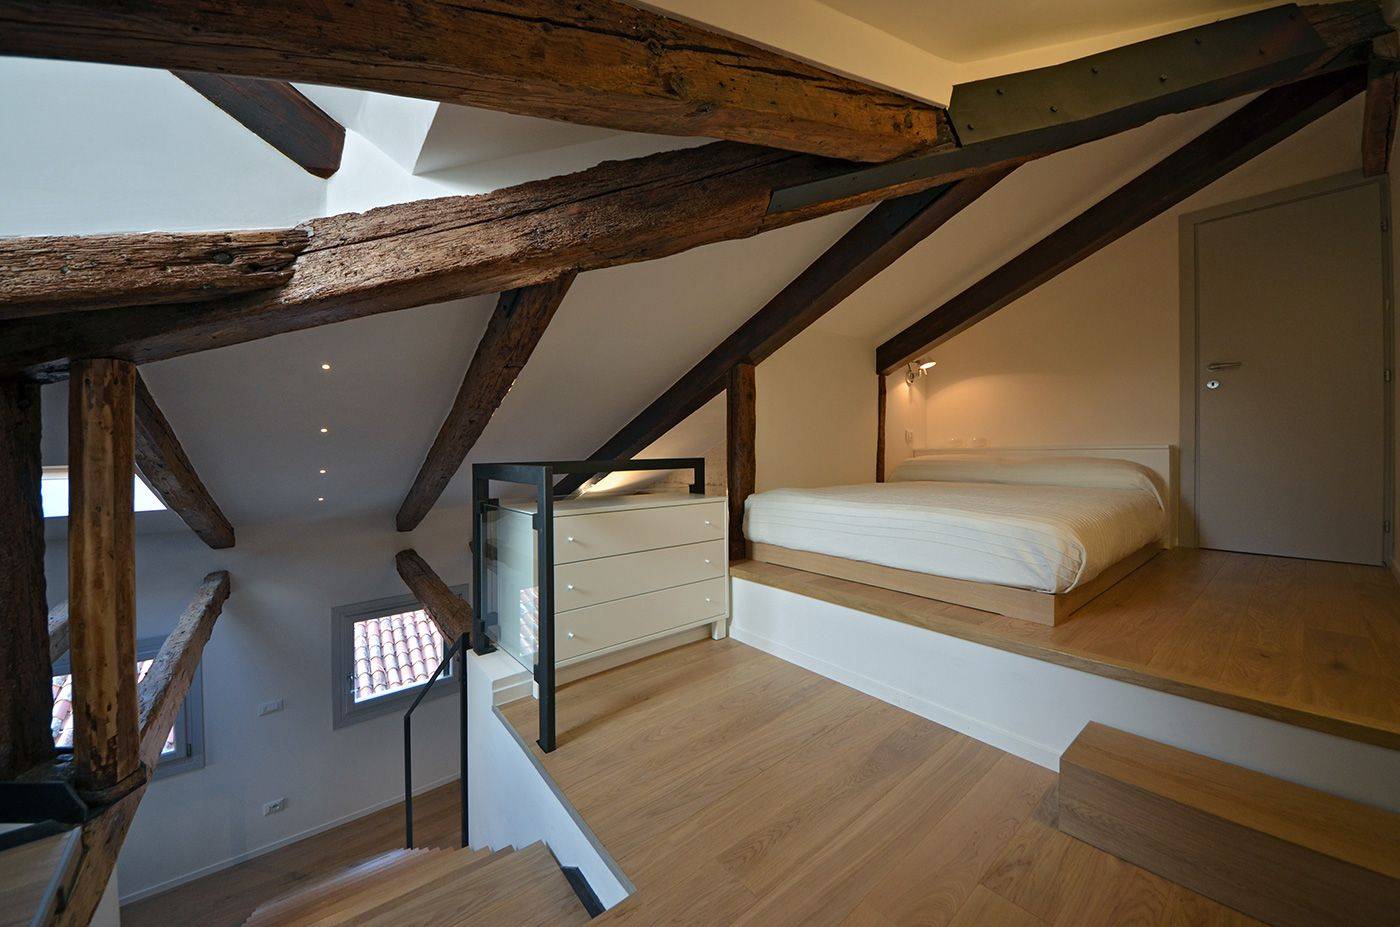 in the attic level there is a 140 cm wide bed 